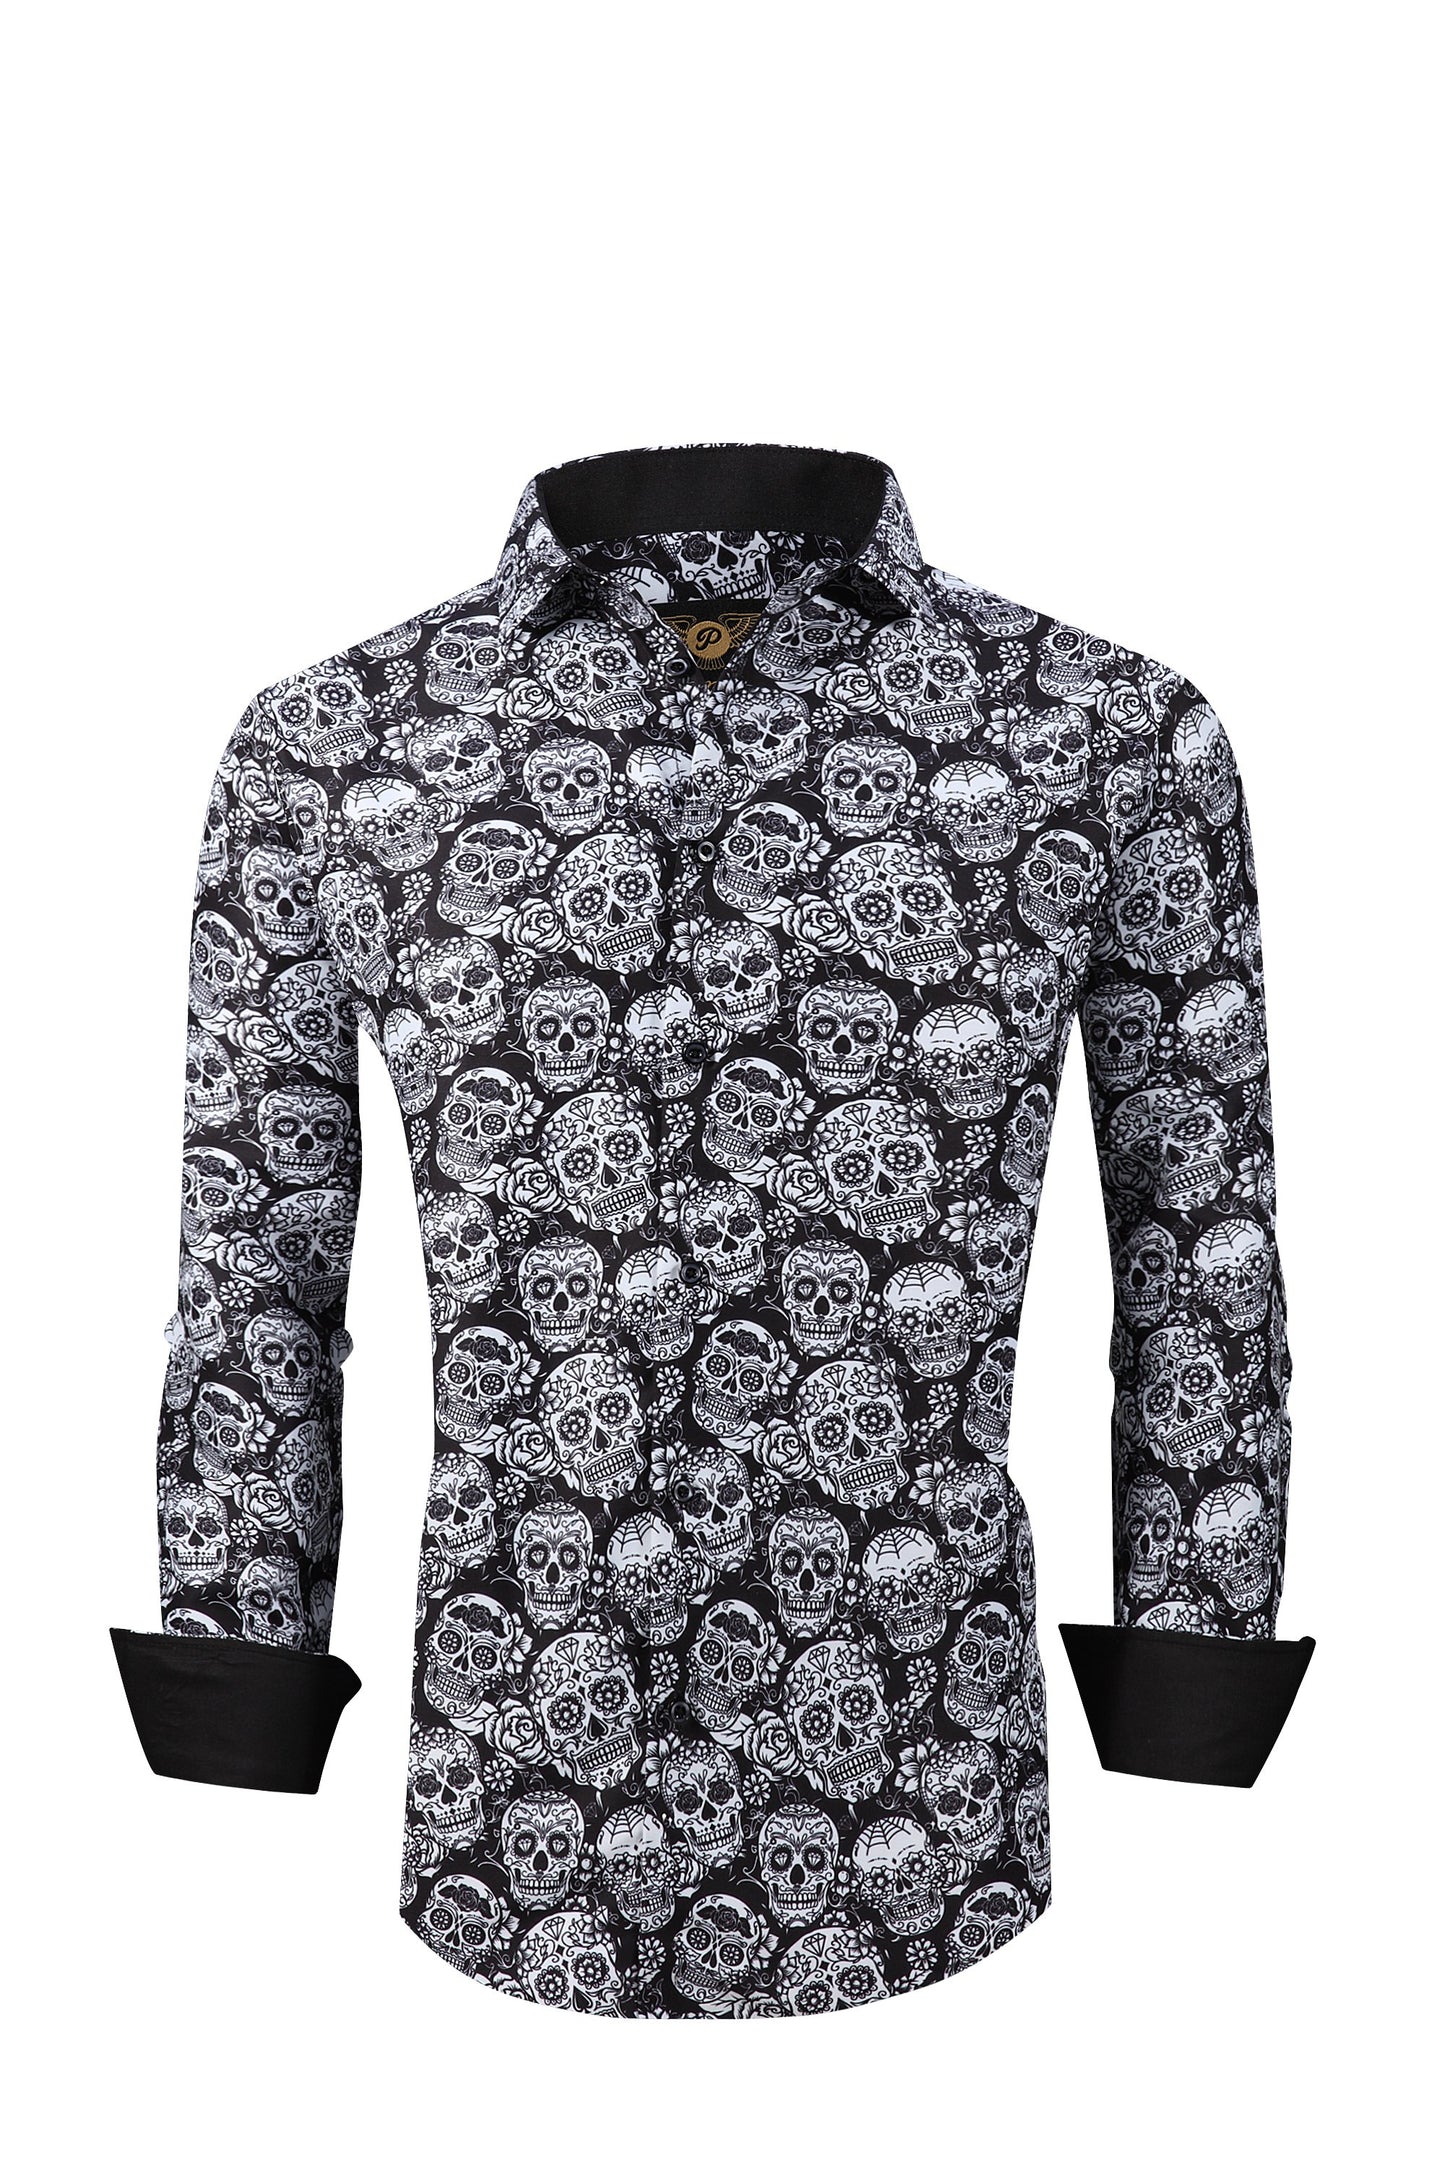 Mens PREMIERE Long Sleeve Button Down Dress Shirt Black White Abstract Skull